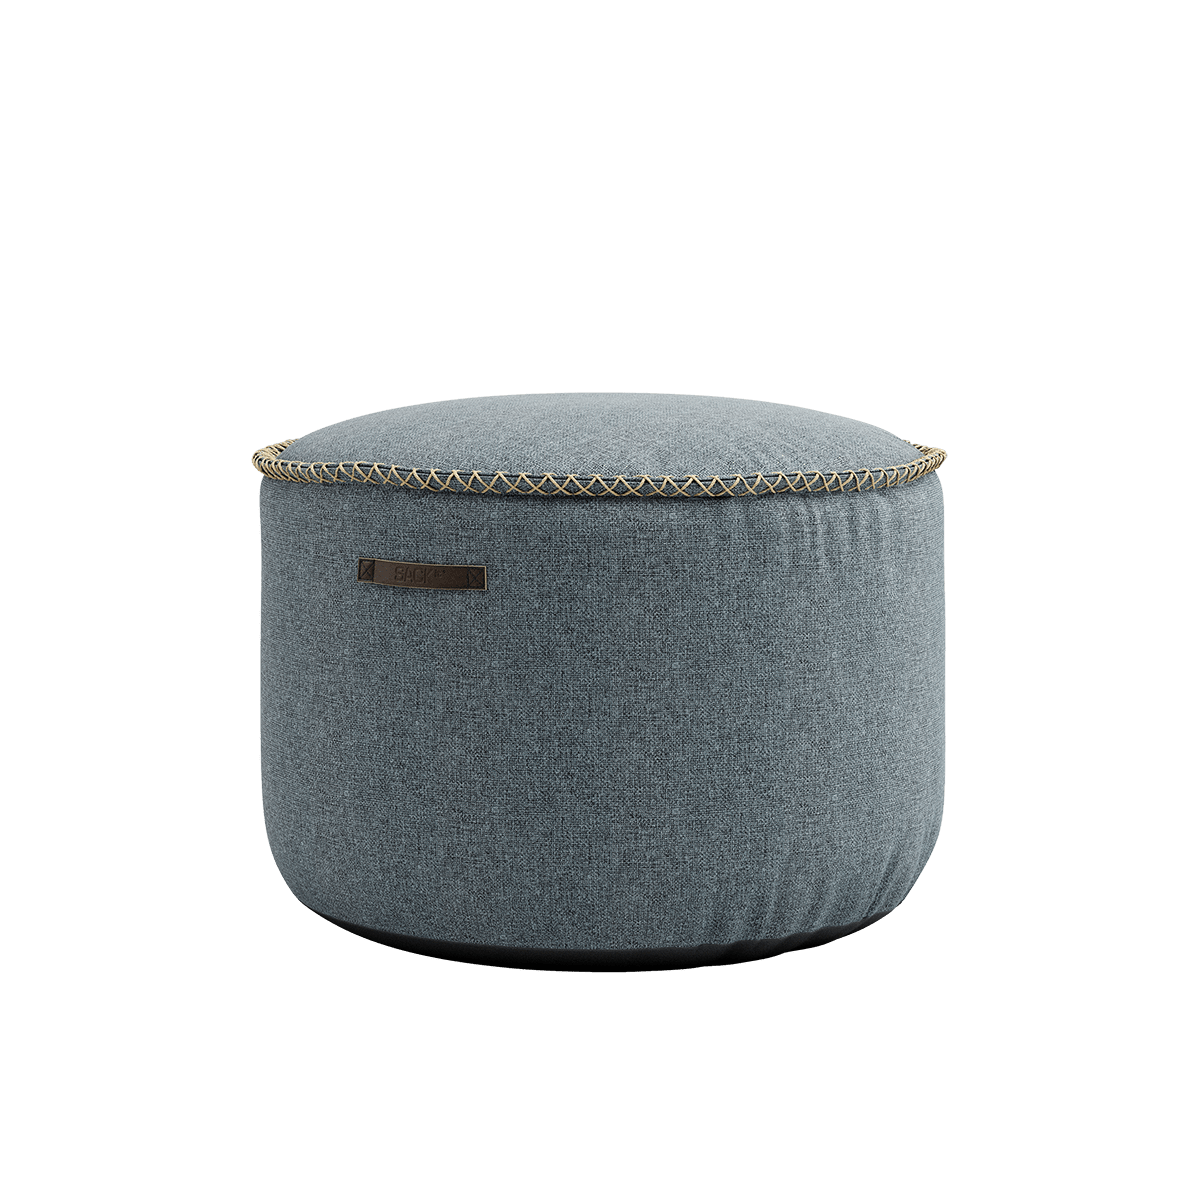 variant_8567010% | Medley Pouf [Contract] - Medley Dusty Blue | SACKit